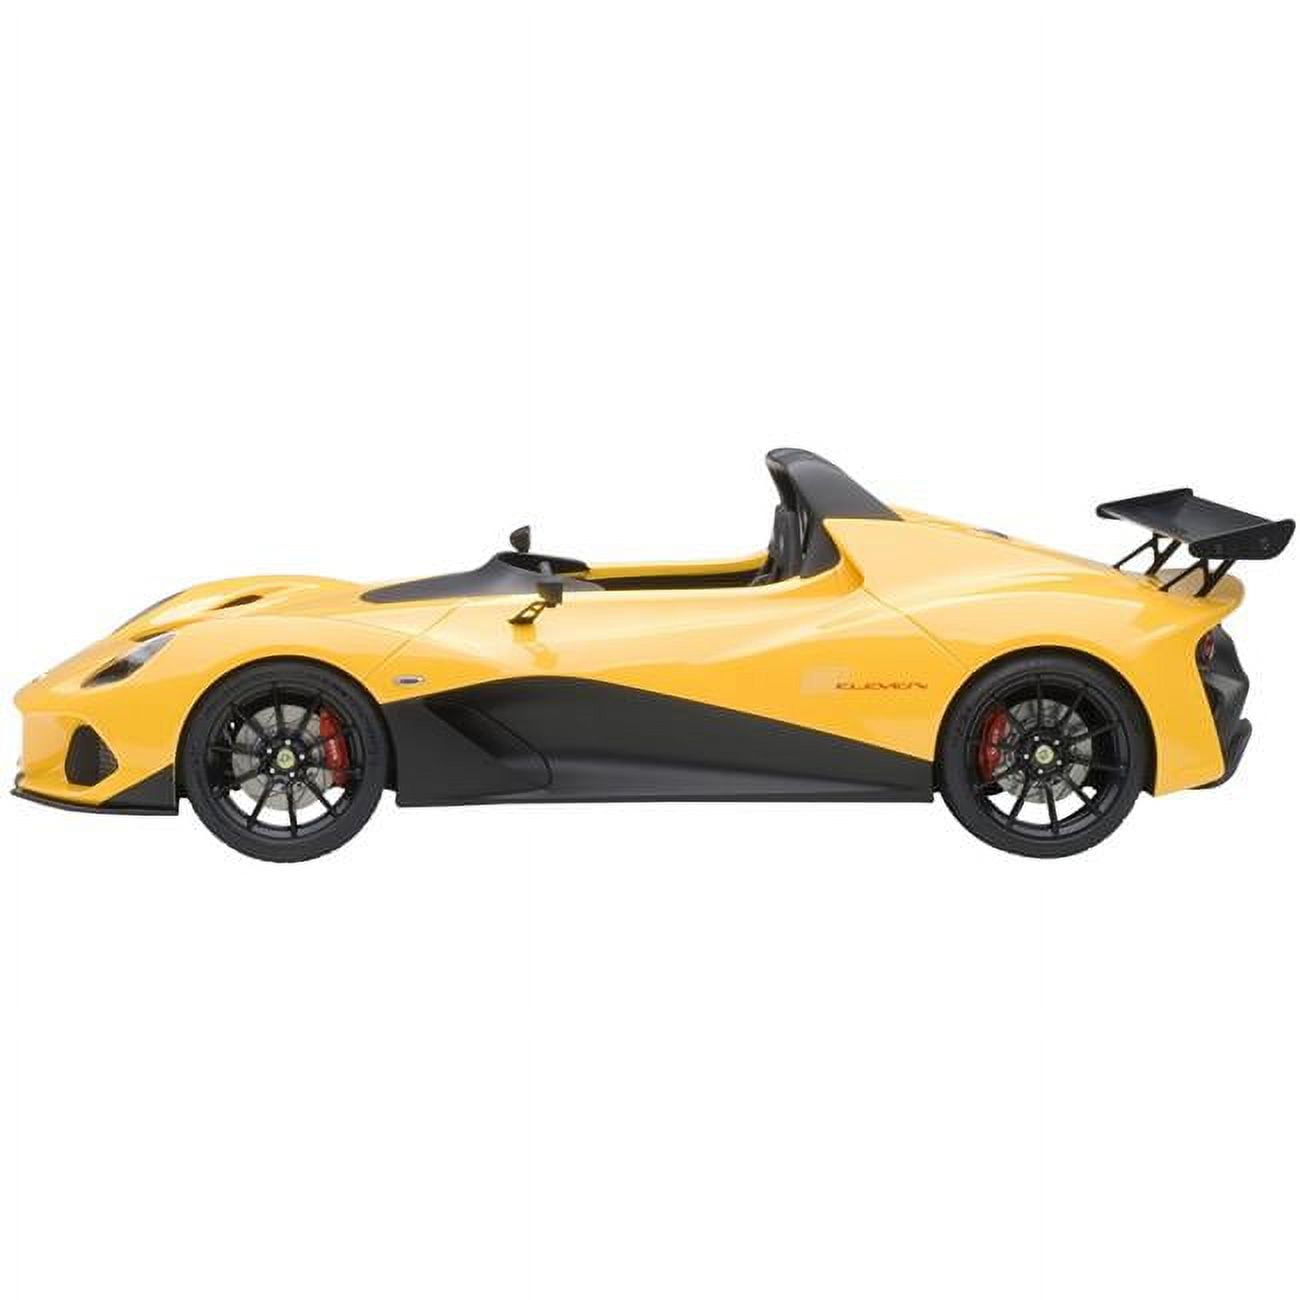 Picture of Autoart 75393 Lotus 3-Eleven Yellow 1-18 Scale Model Car